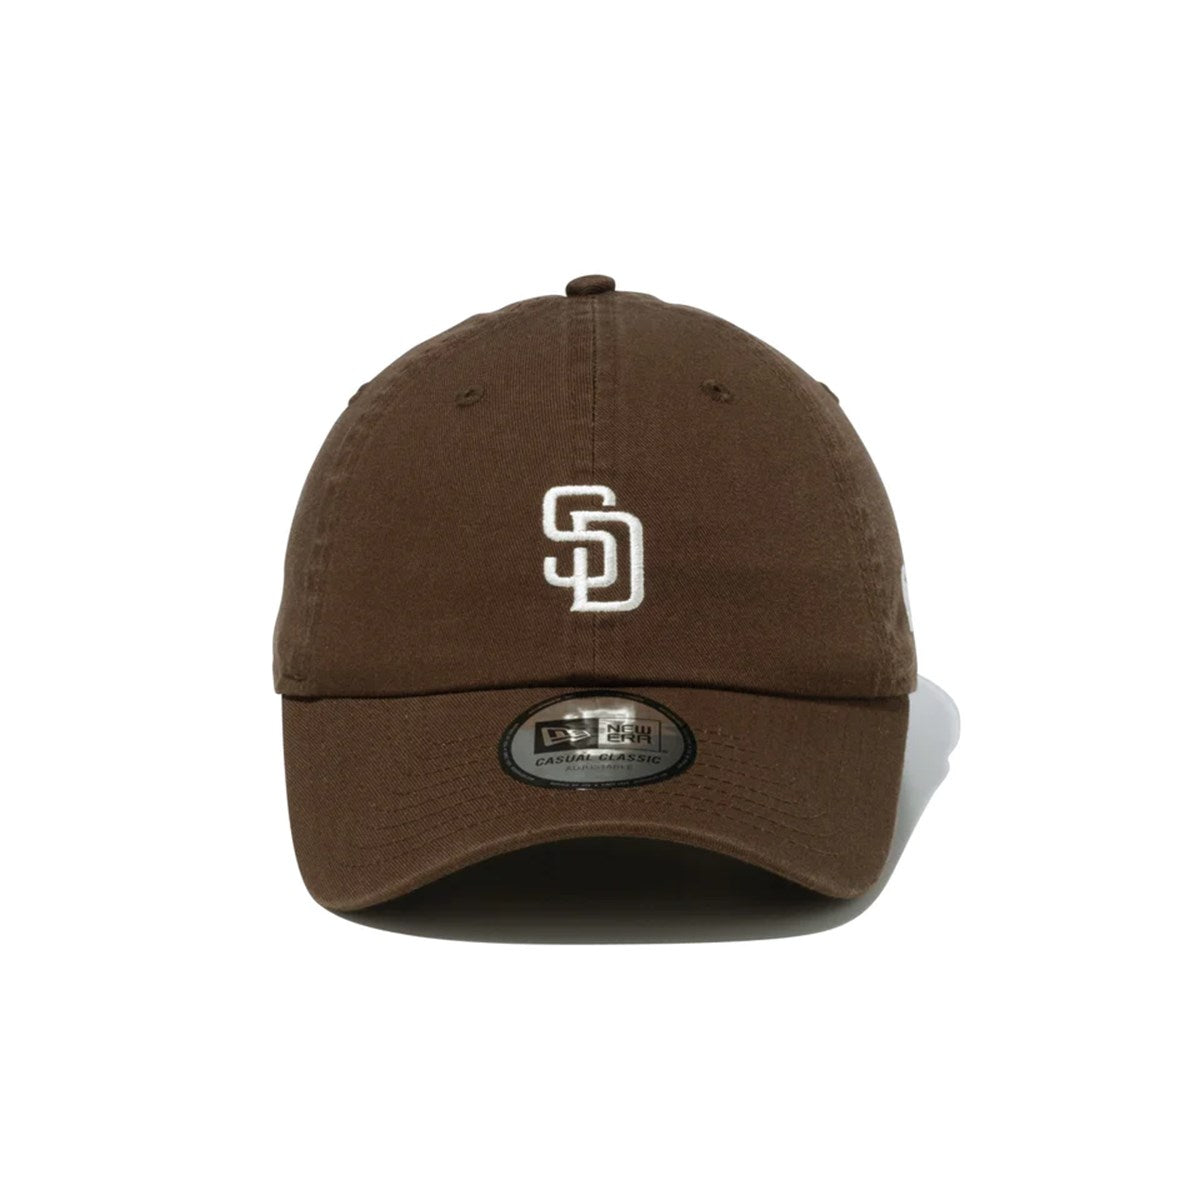 NEW ERA San Diego Padres - Casual Classic MID LOGO WAL CRM【14109506】